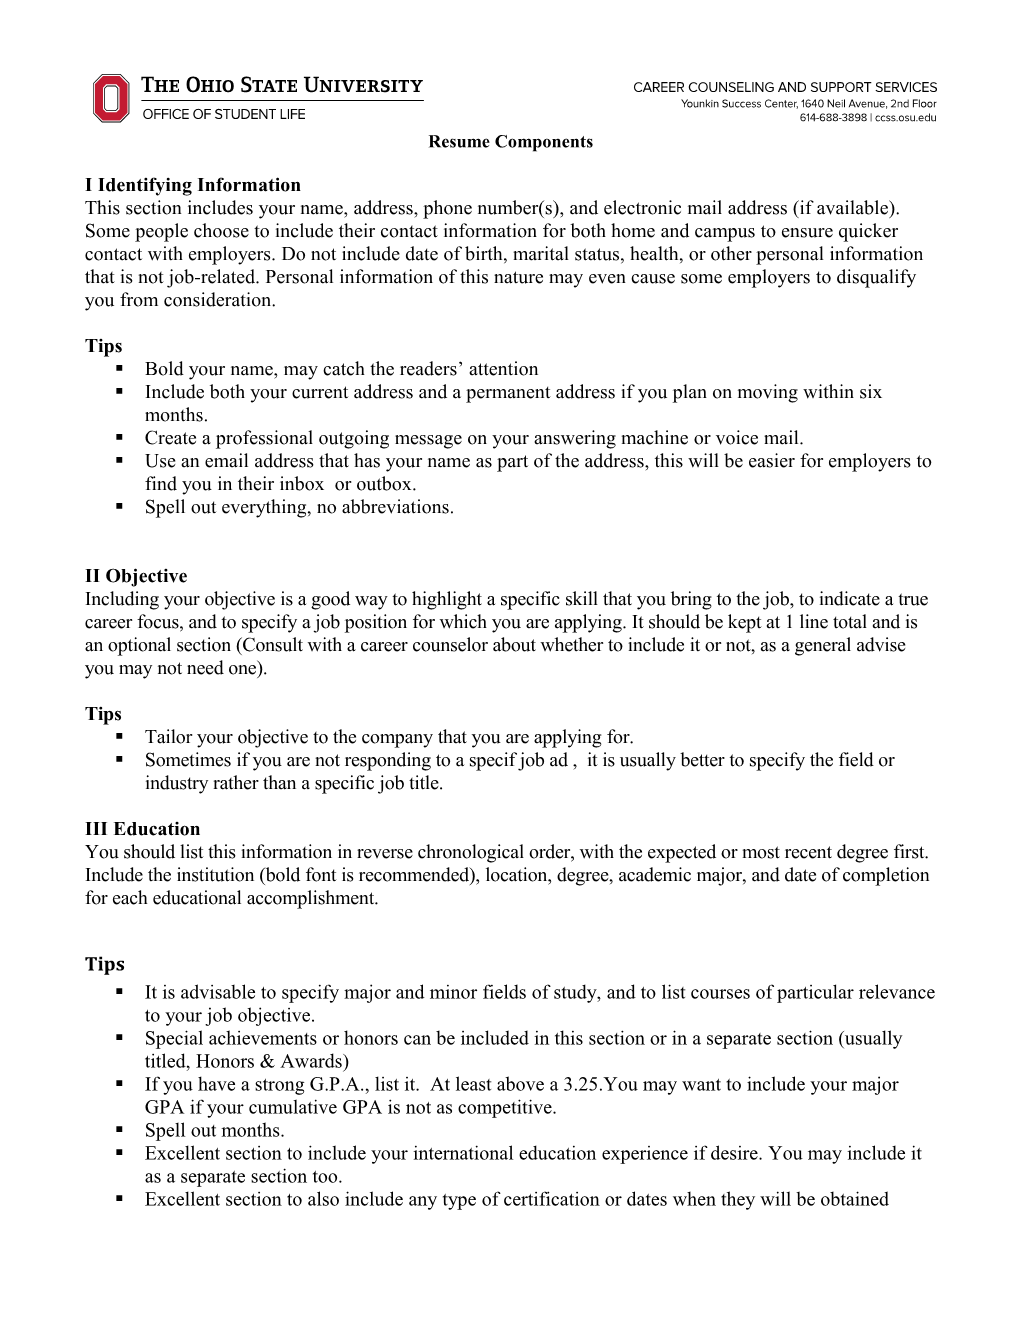 Resume Components